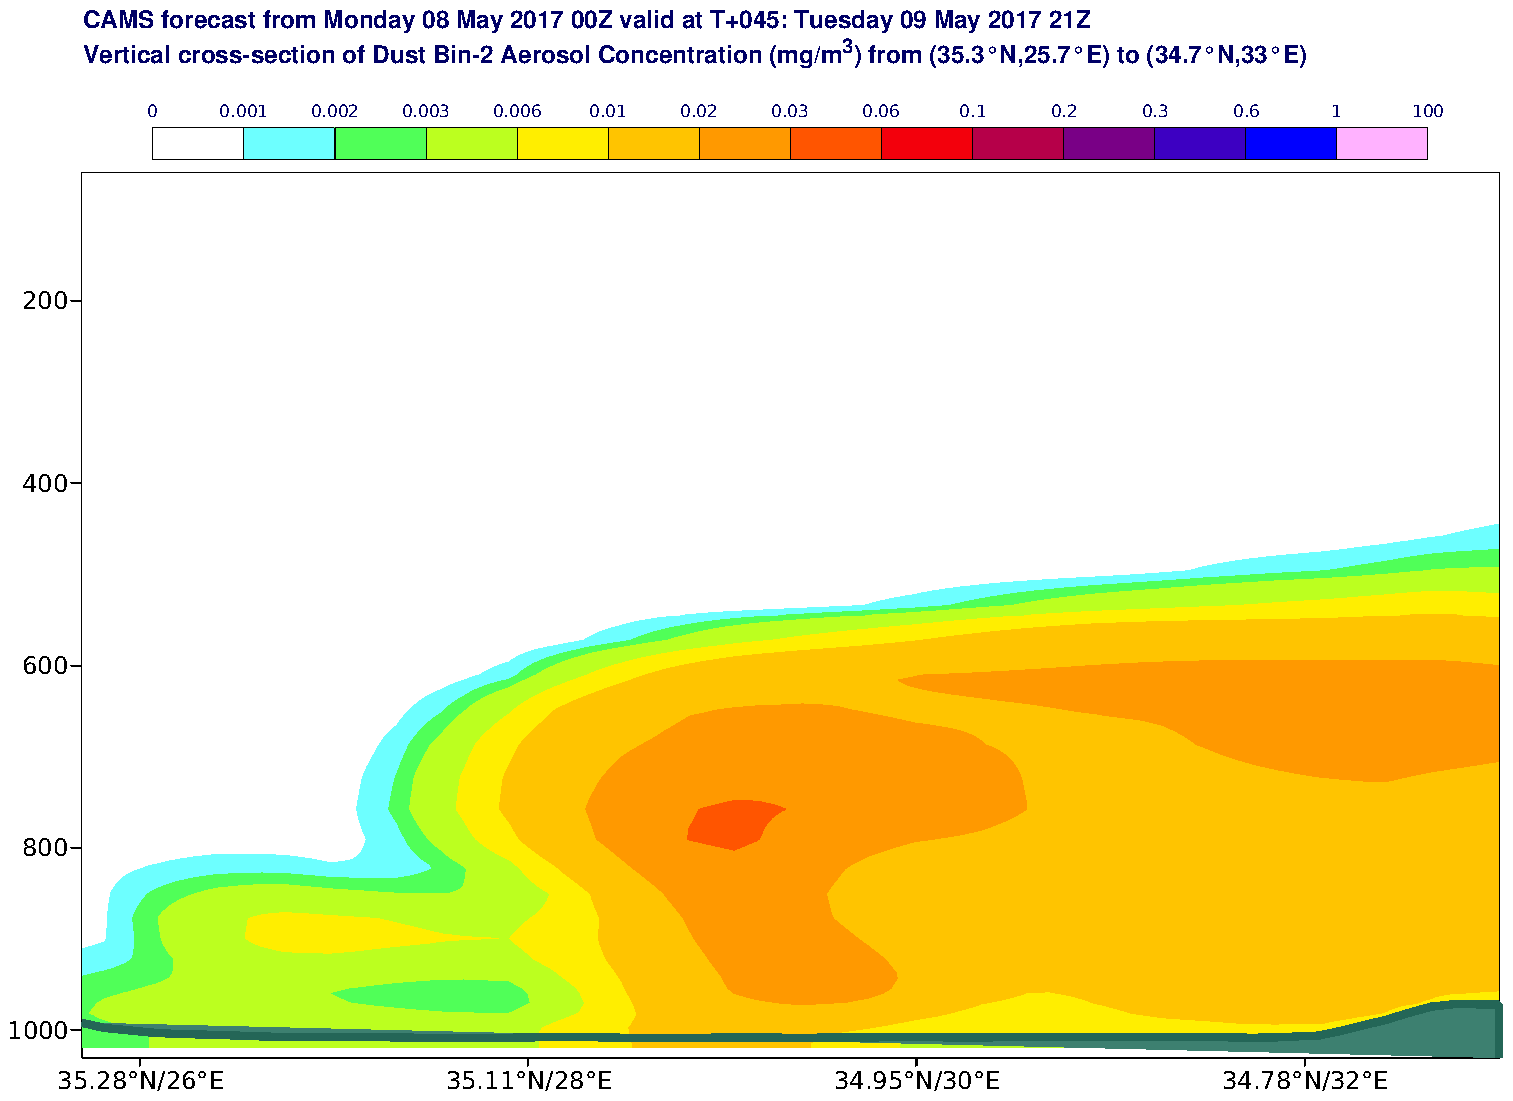 Vertical cross-section of Dust Bin-2 Aerosol Concentration (mg/m3) valid at T45 - 2017-05-09 21:00